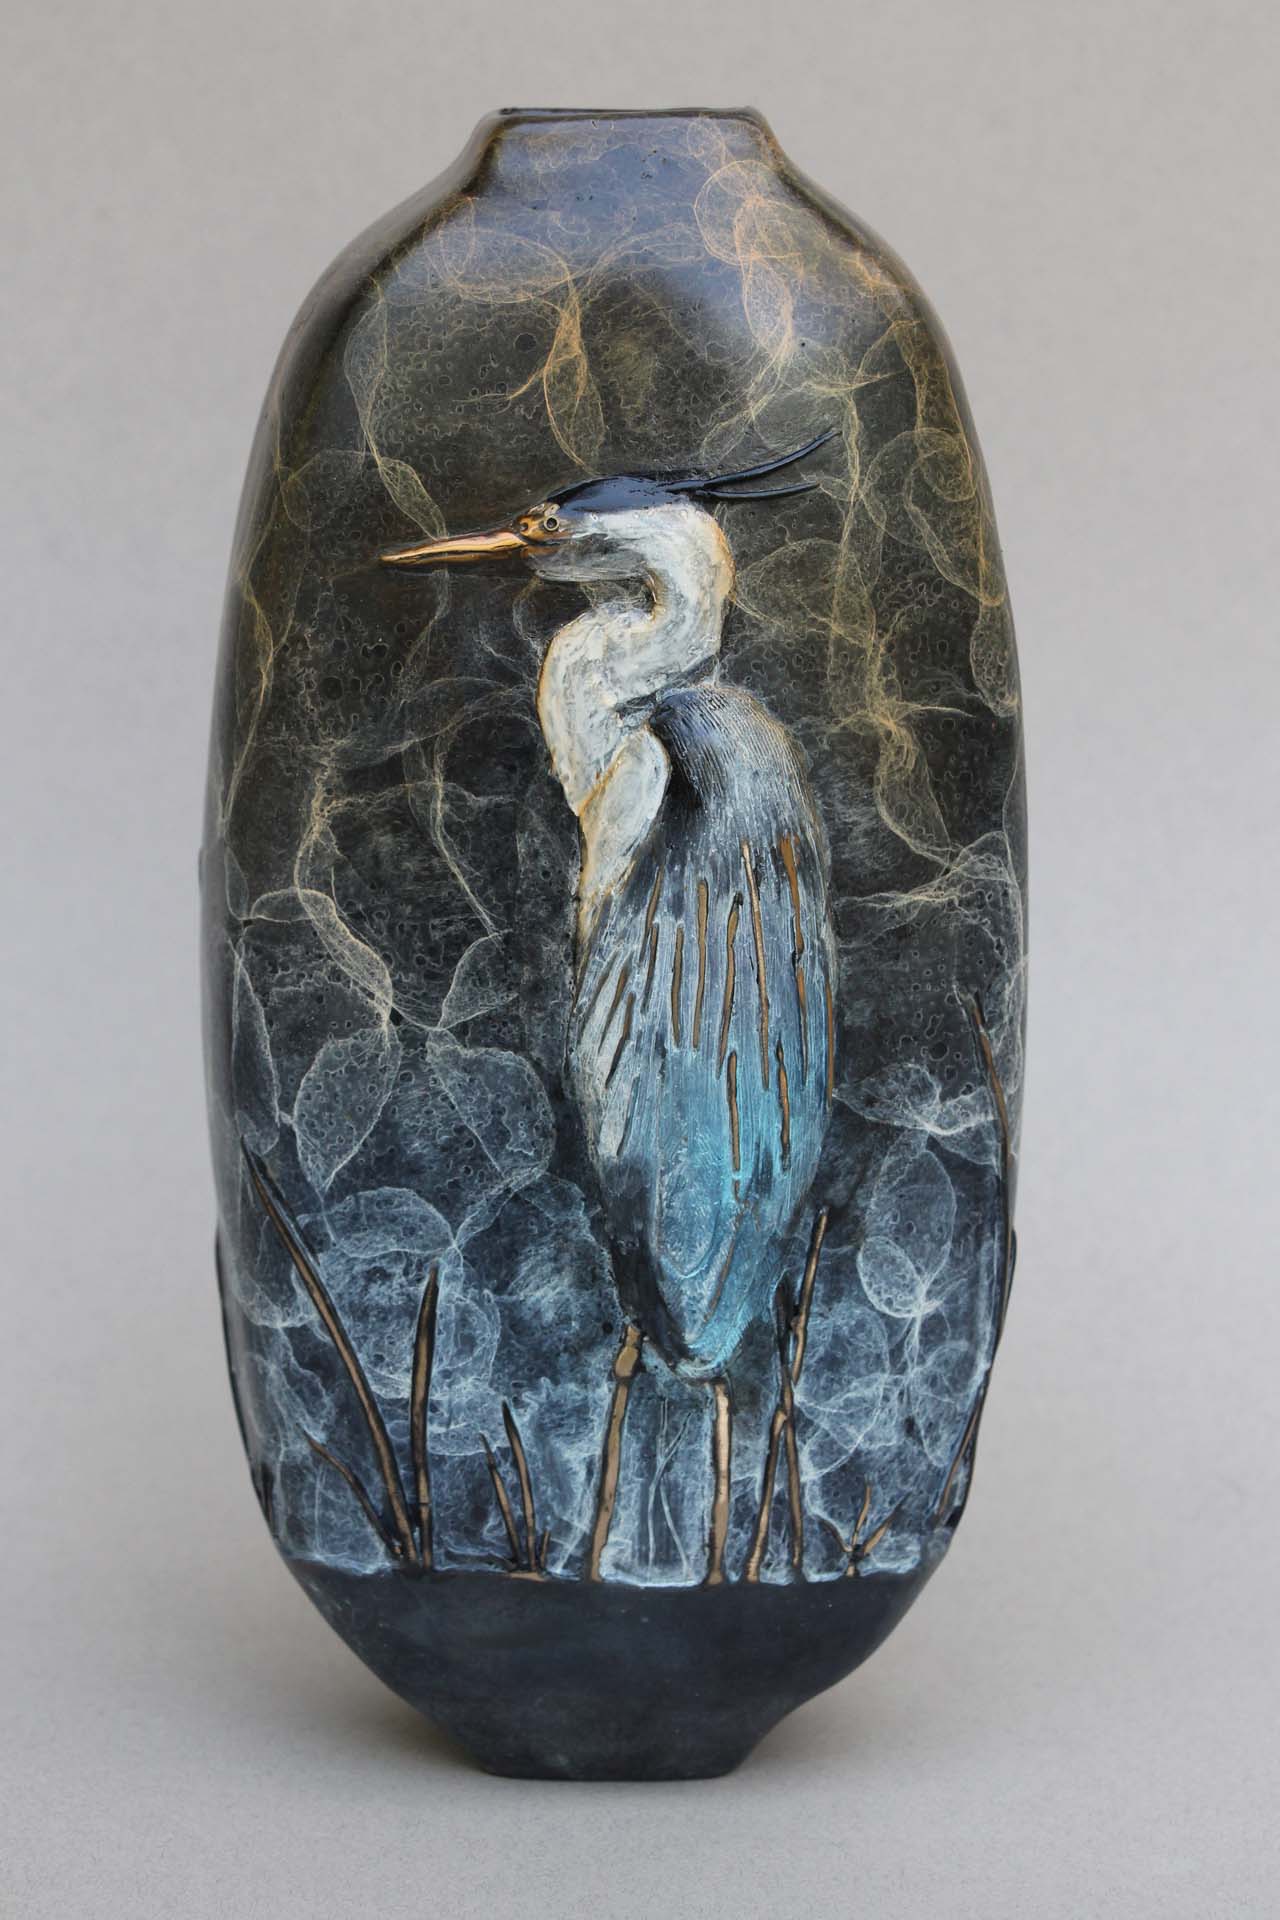 Side 2 of the Great Blue Heron vase. The Blue Heron is in a relaxed position.